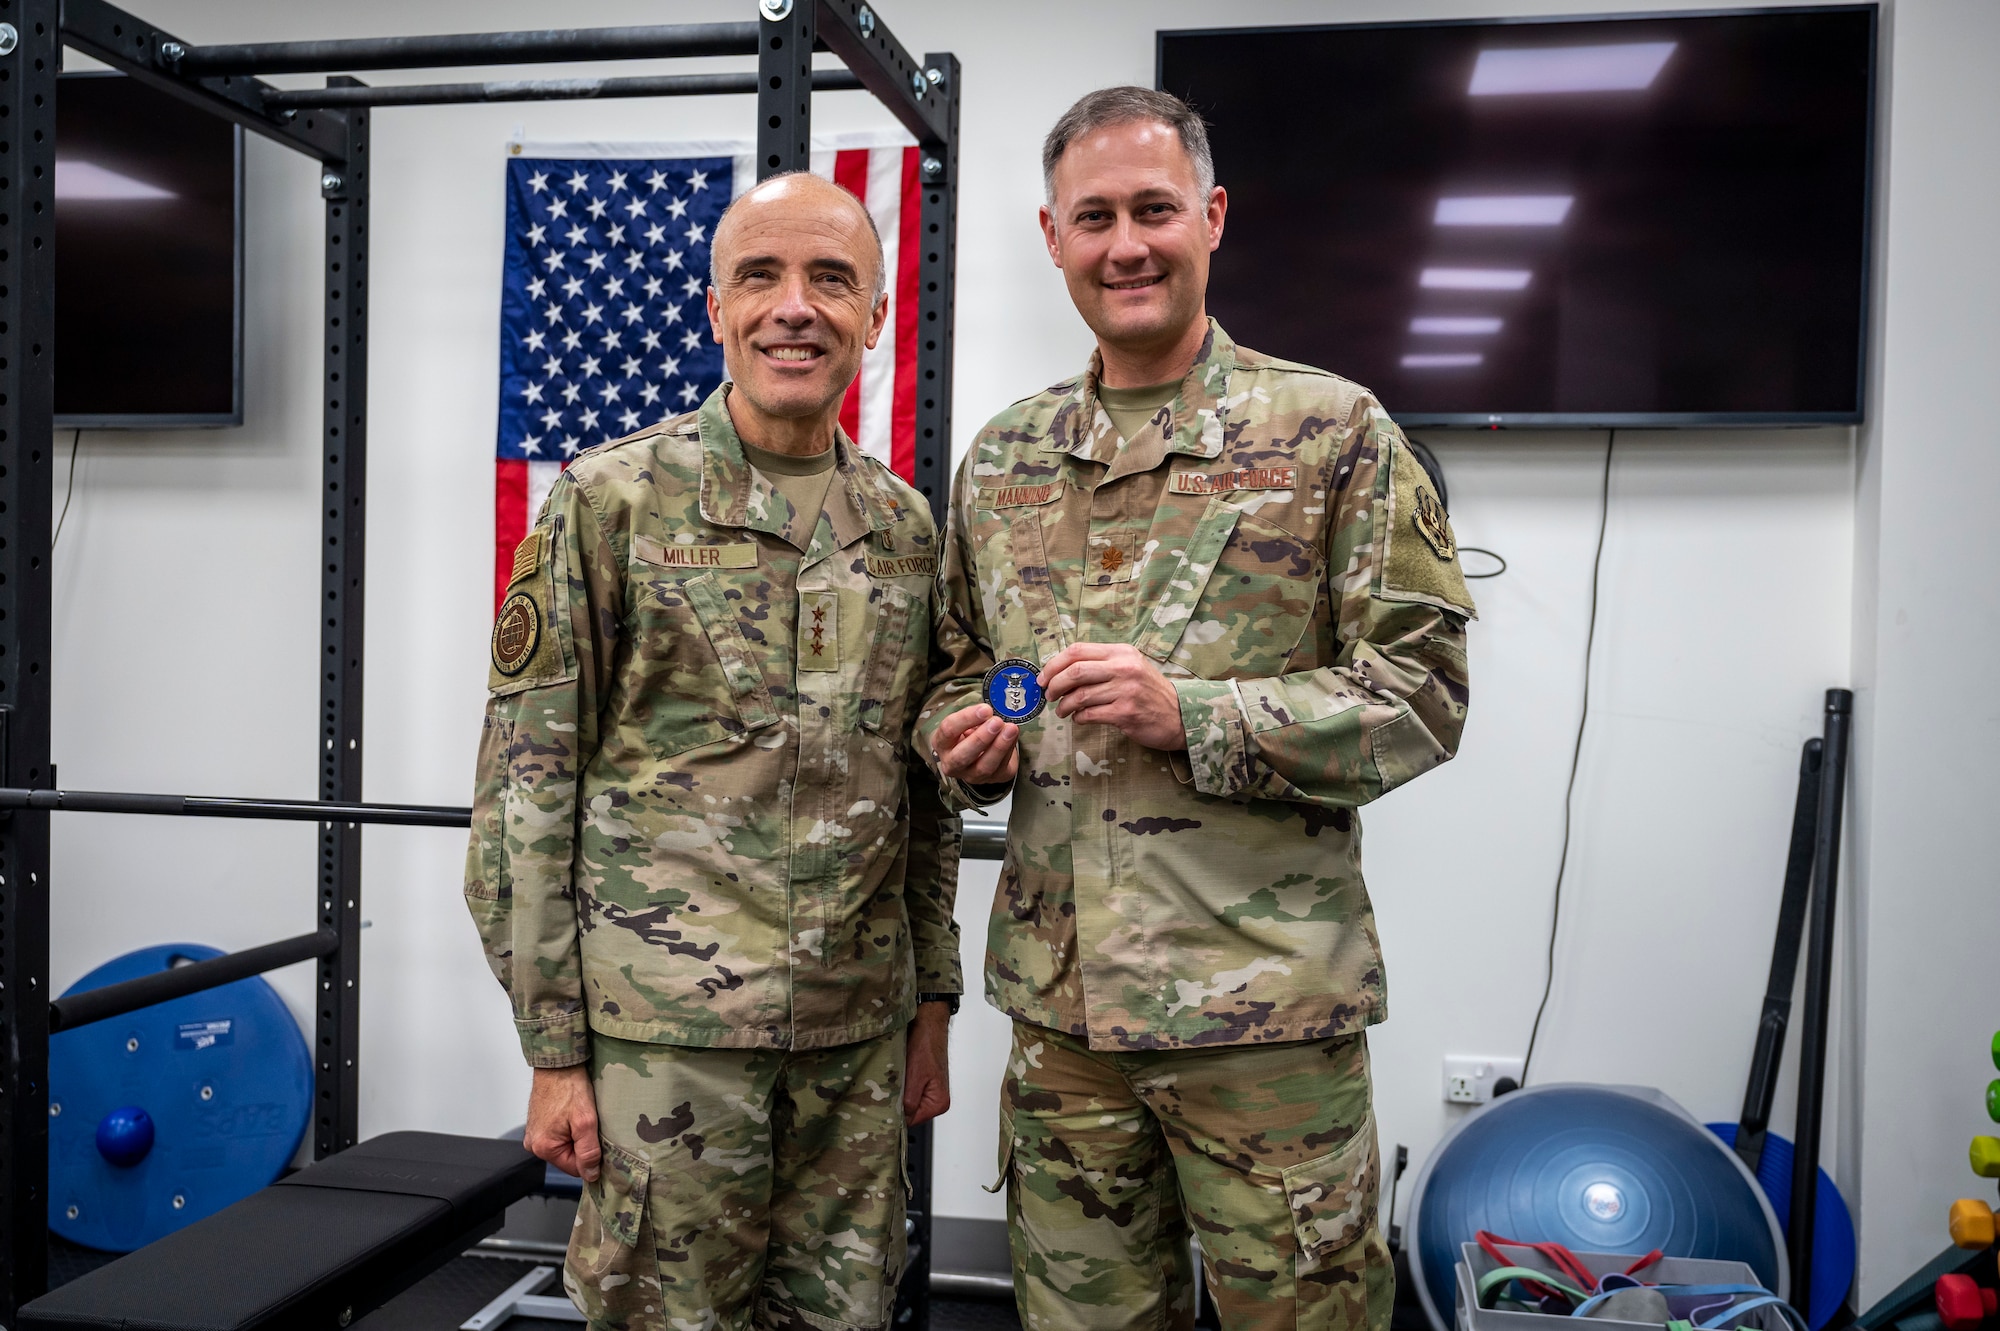 Two military members pose for a photo displaying a coin.